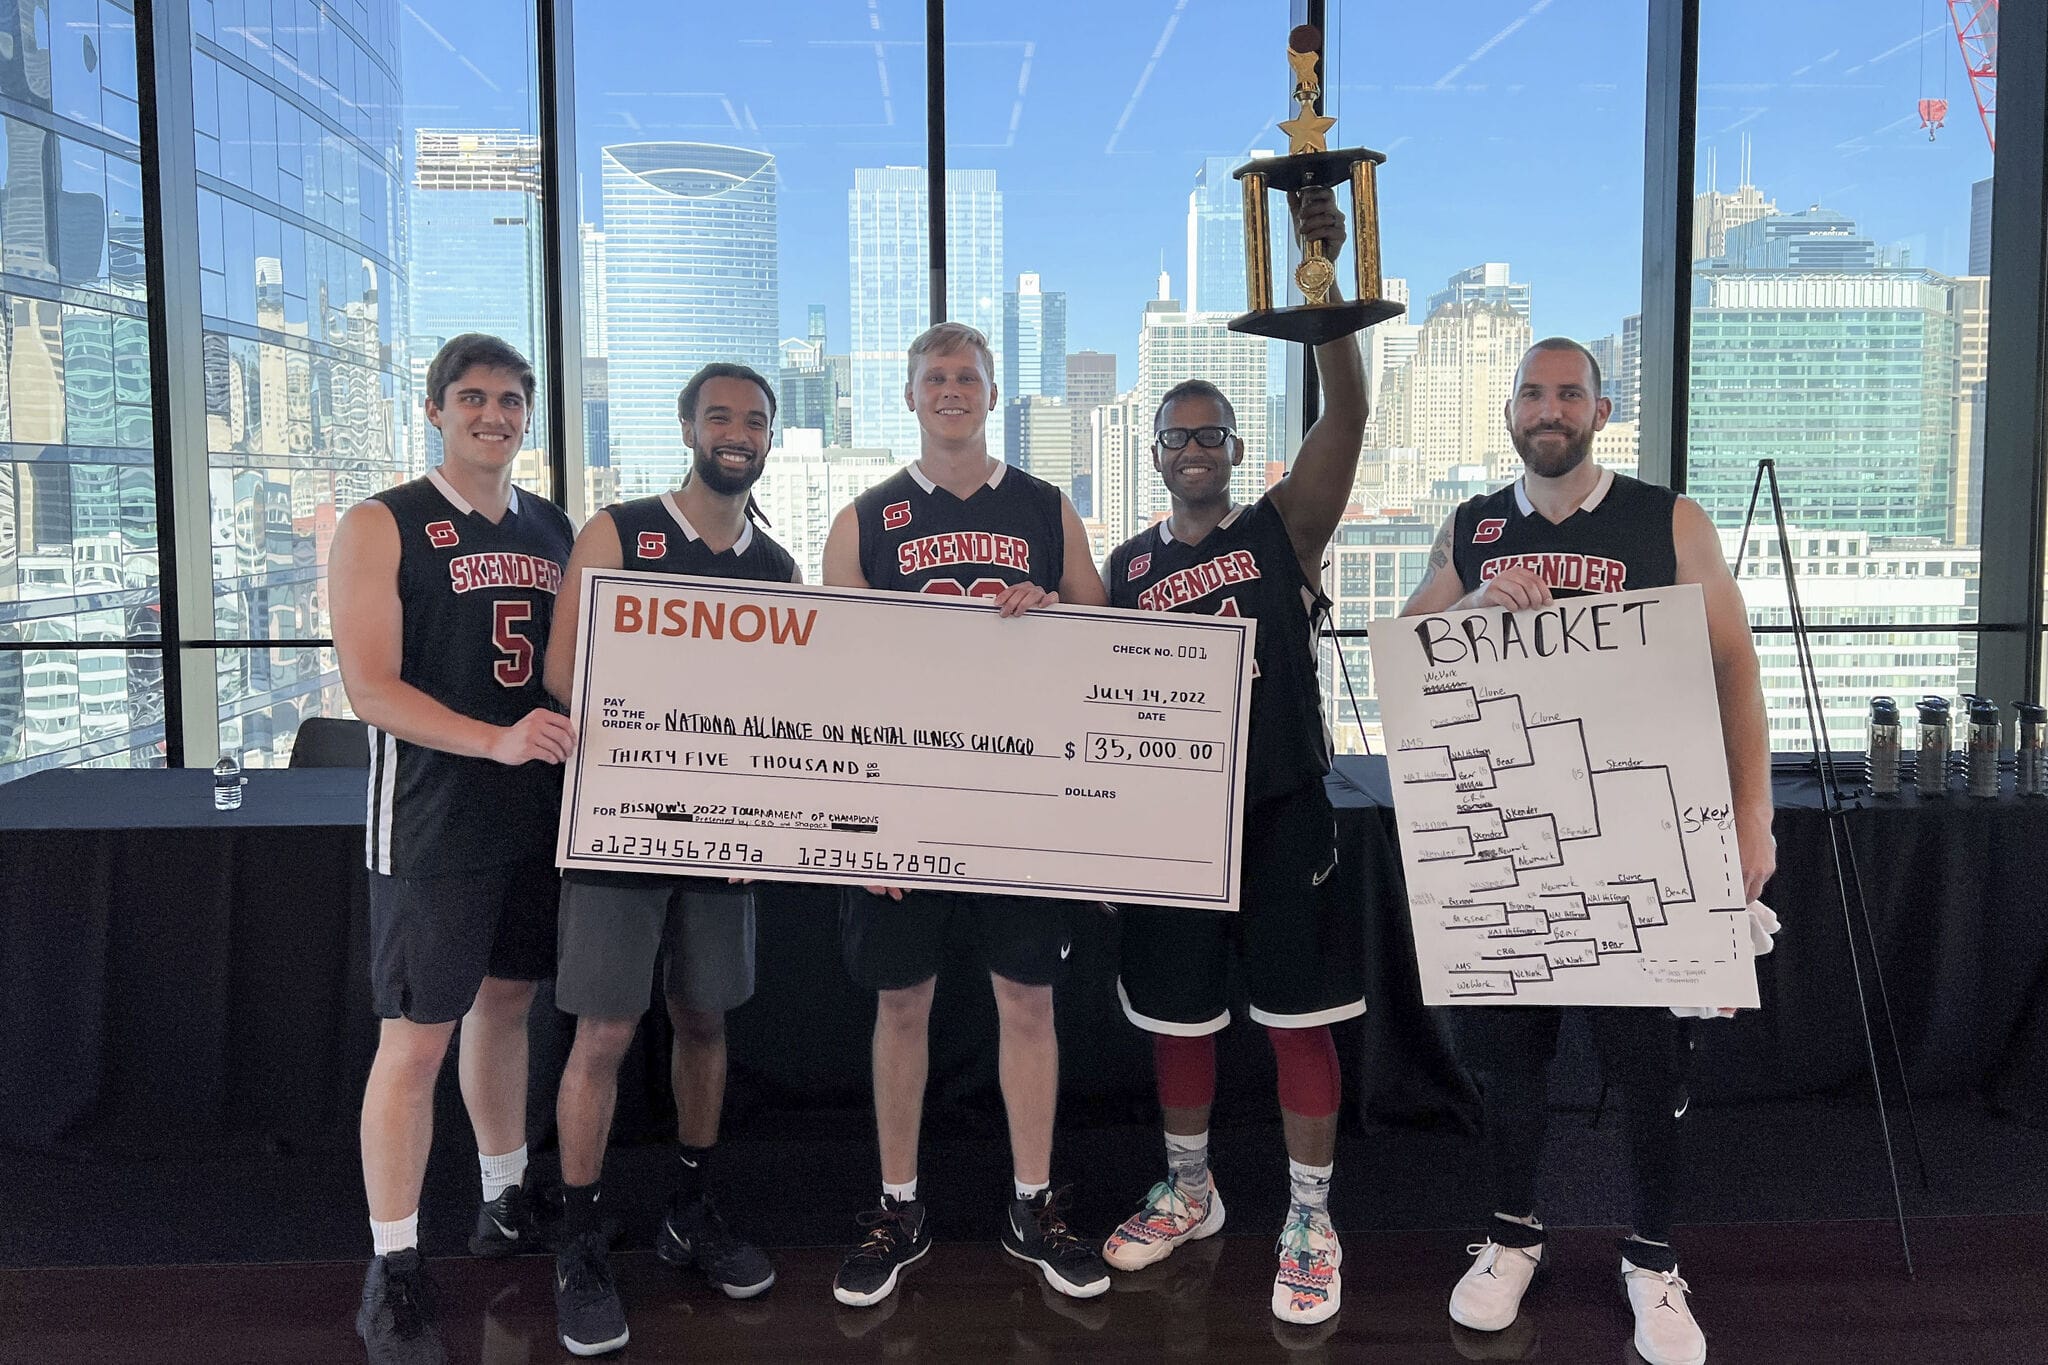 Skender Wins Bisnow’s Inaugural Tournament of Champions 3-on-3 Charity Basketball Competition